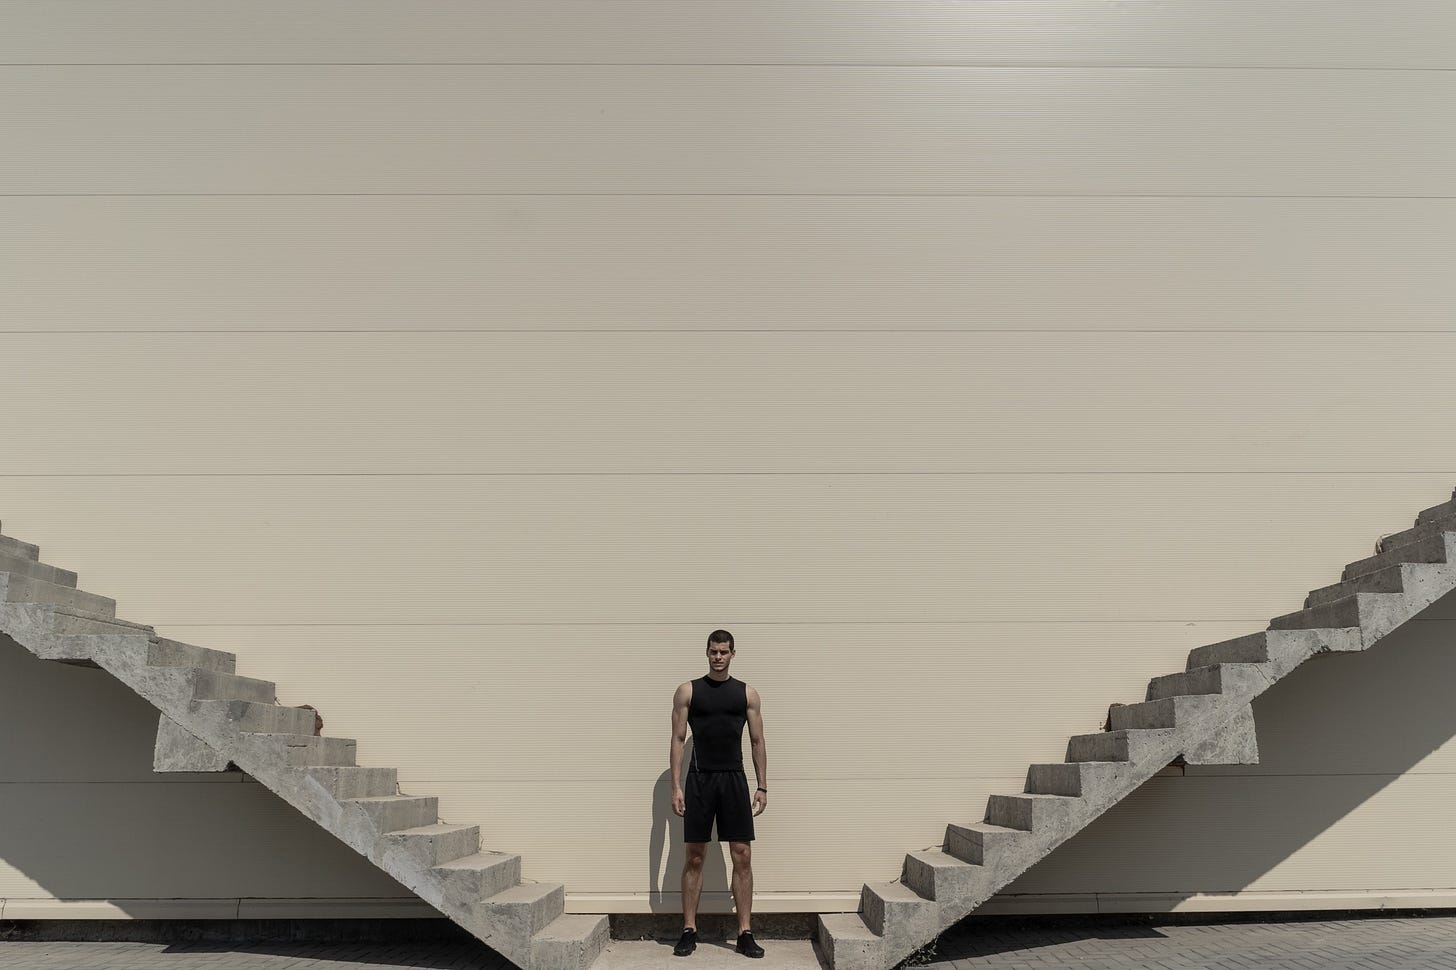 A man stands between two sets of stairs and is faced with deciding which way to go.